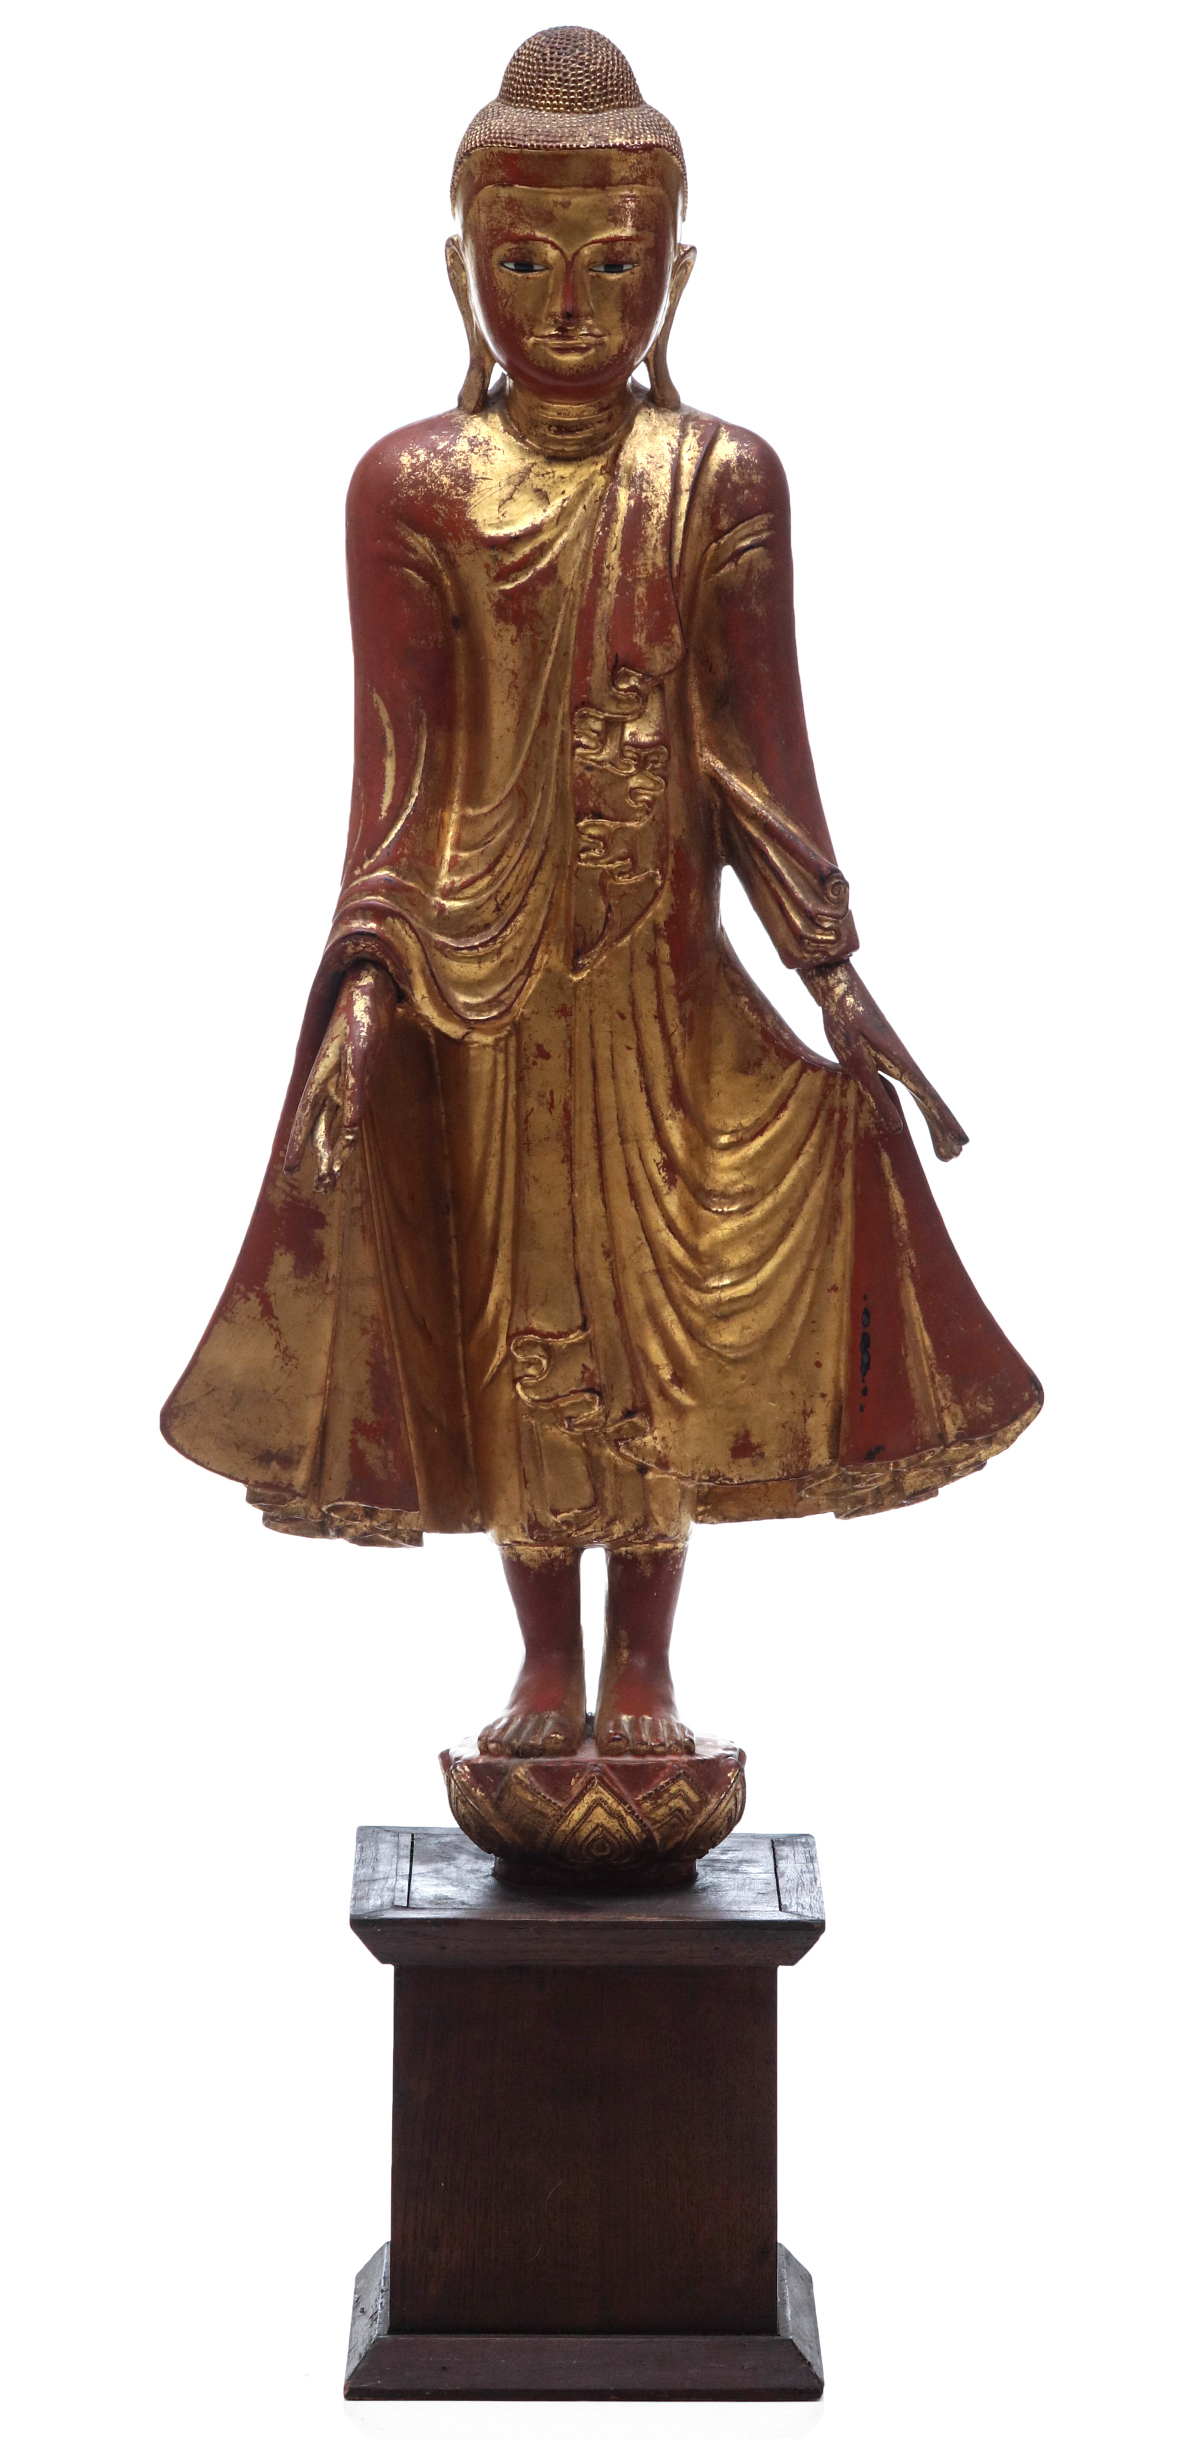 A 47-INCH CARVED AND GILDED WOOD FIGURE OF BUDDHA